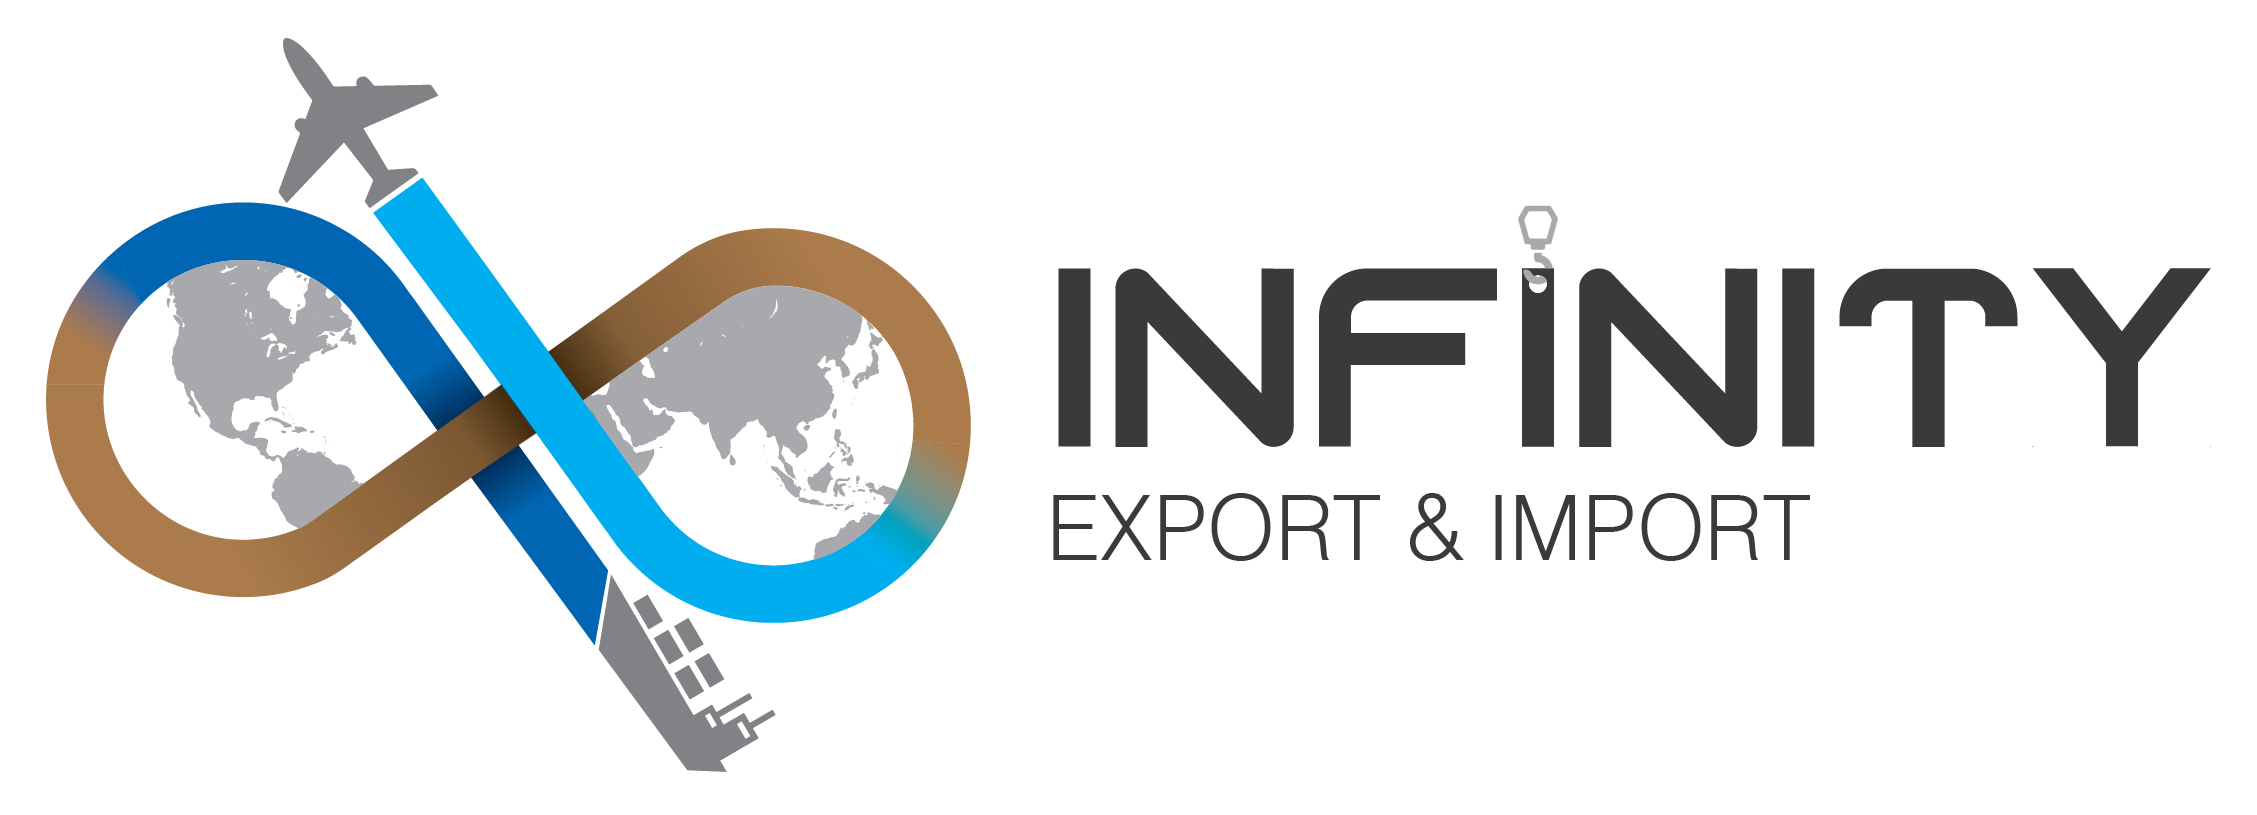 Infinity Exports and Imports